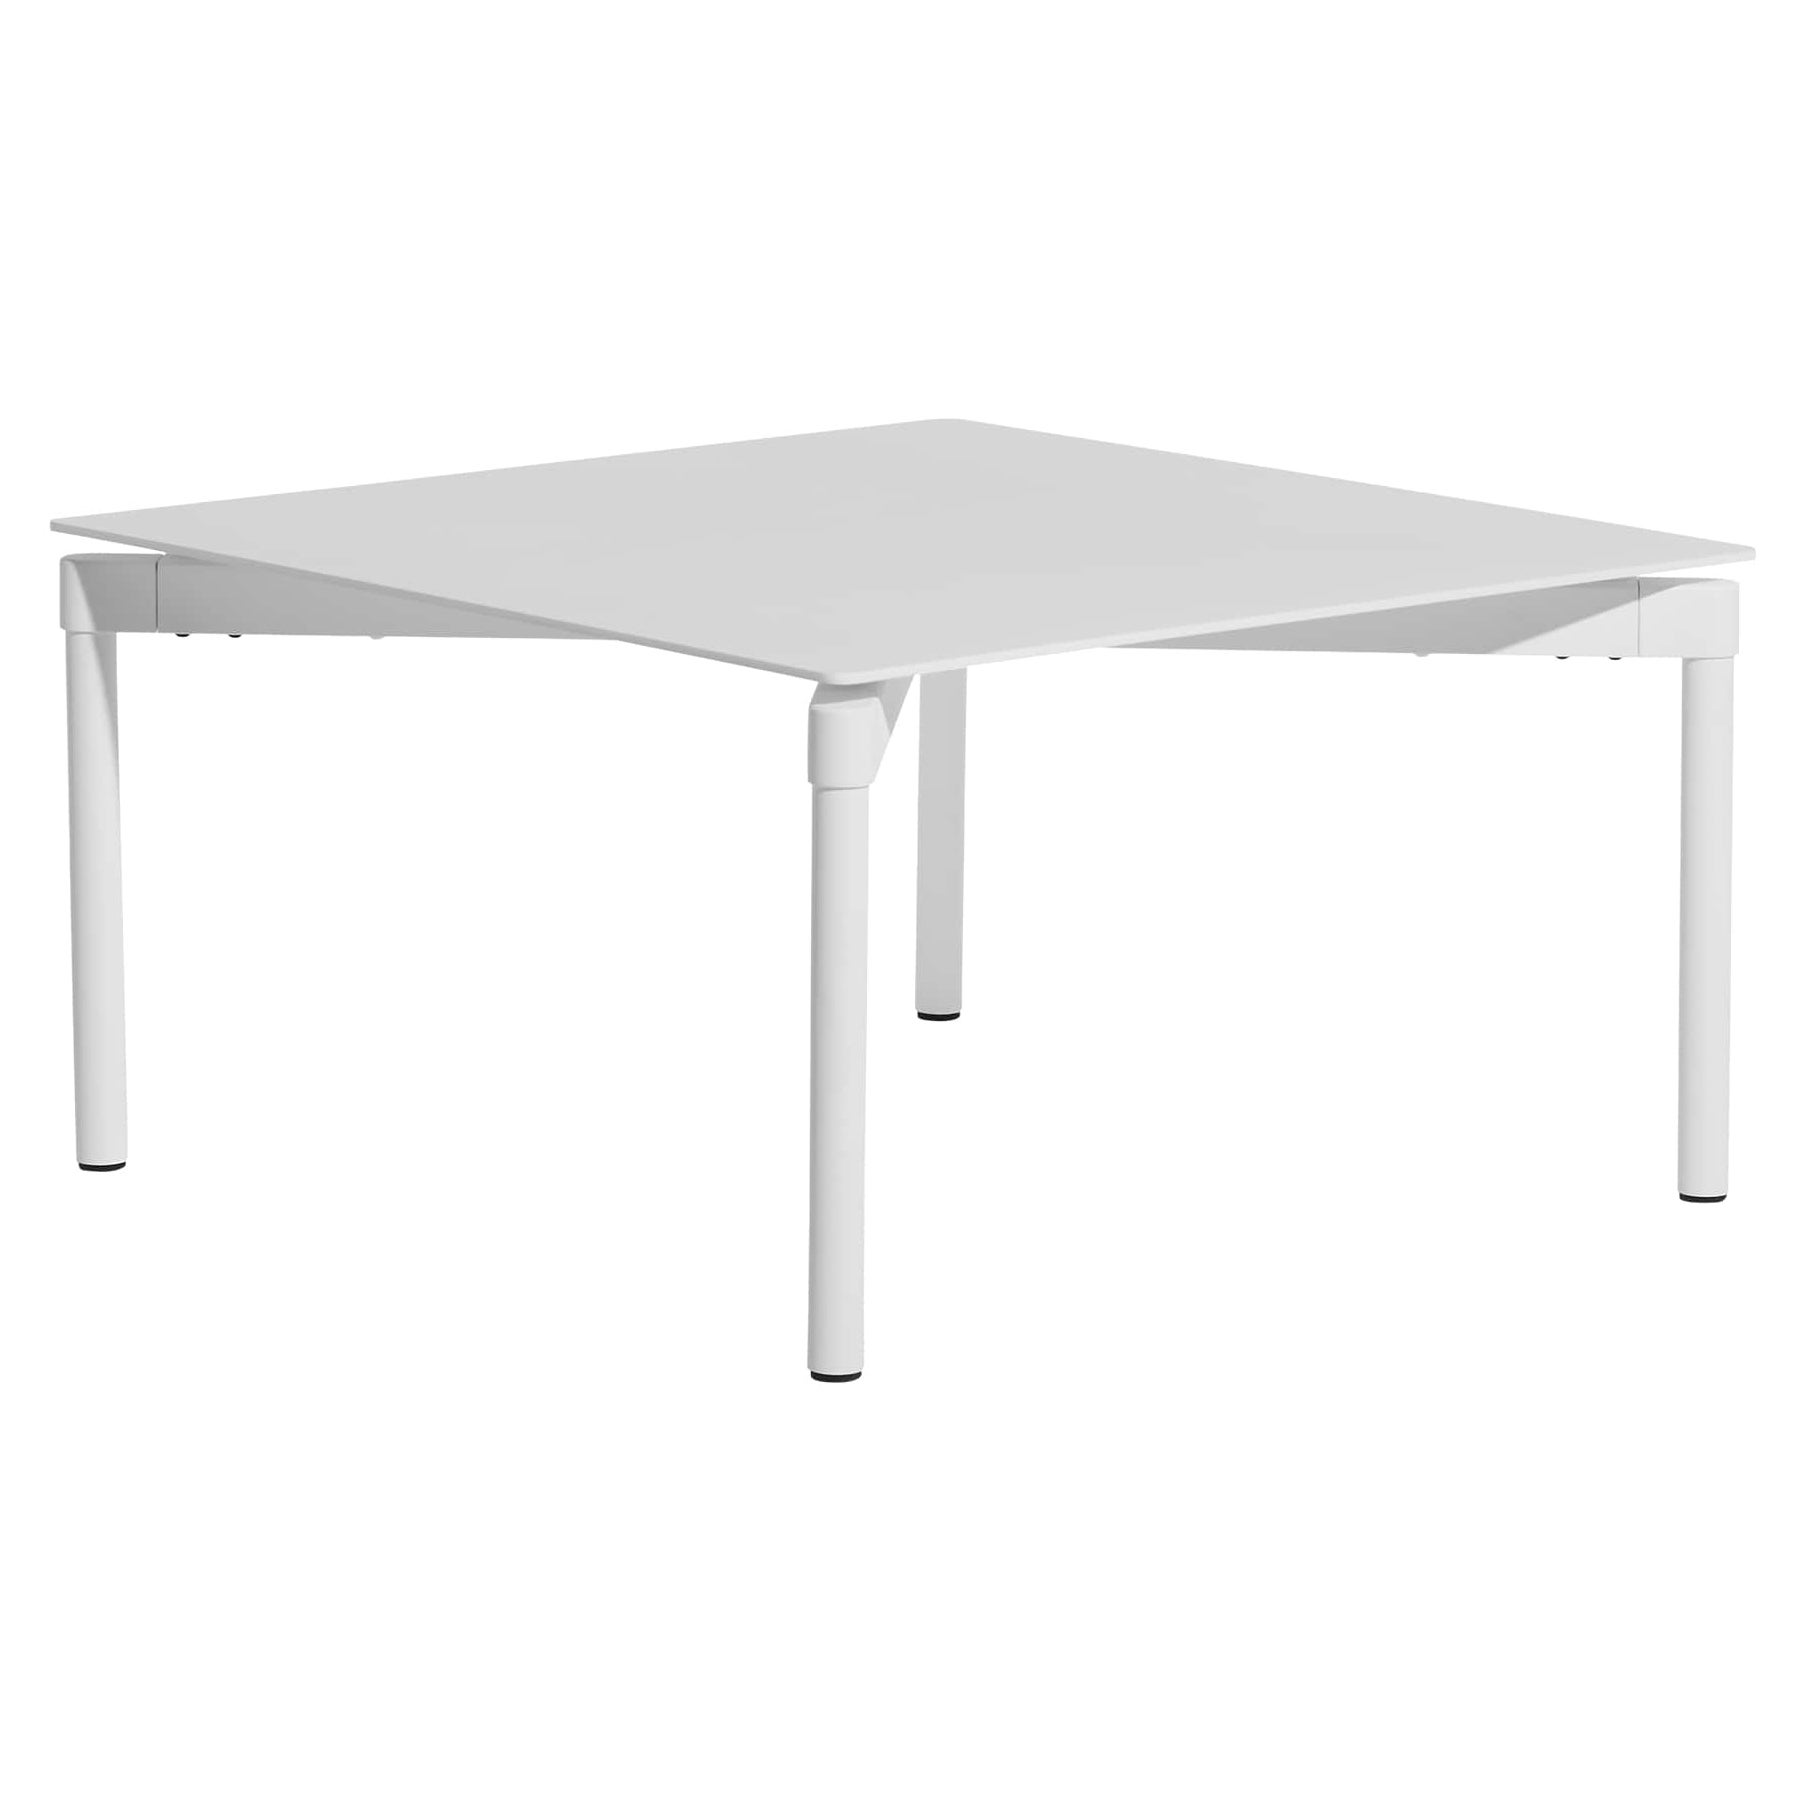 Petite Friture Fromme Coffee Table in White Aluminium by Tom Chung, 2020 For Sale